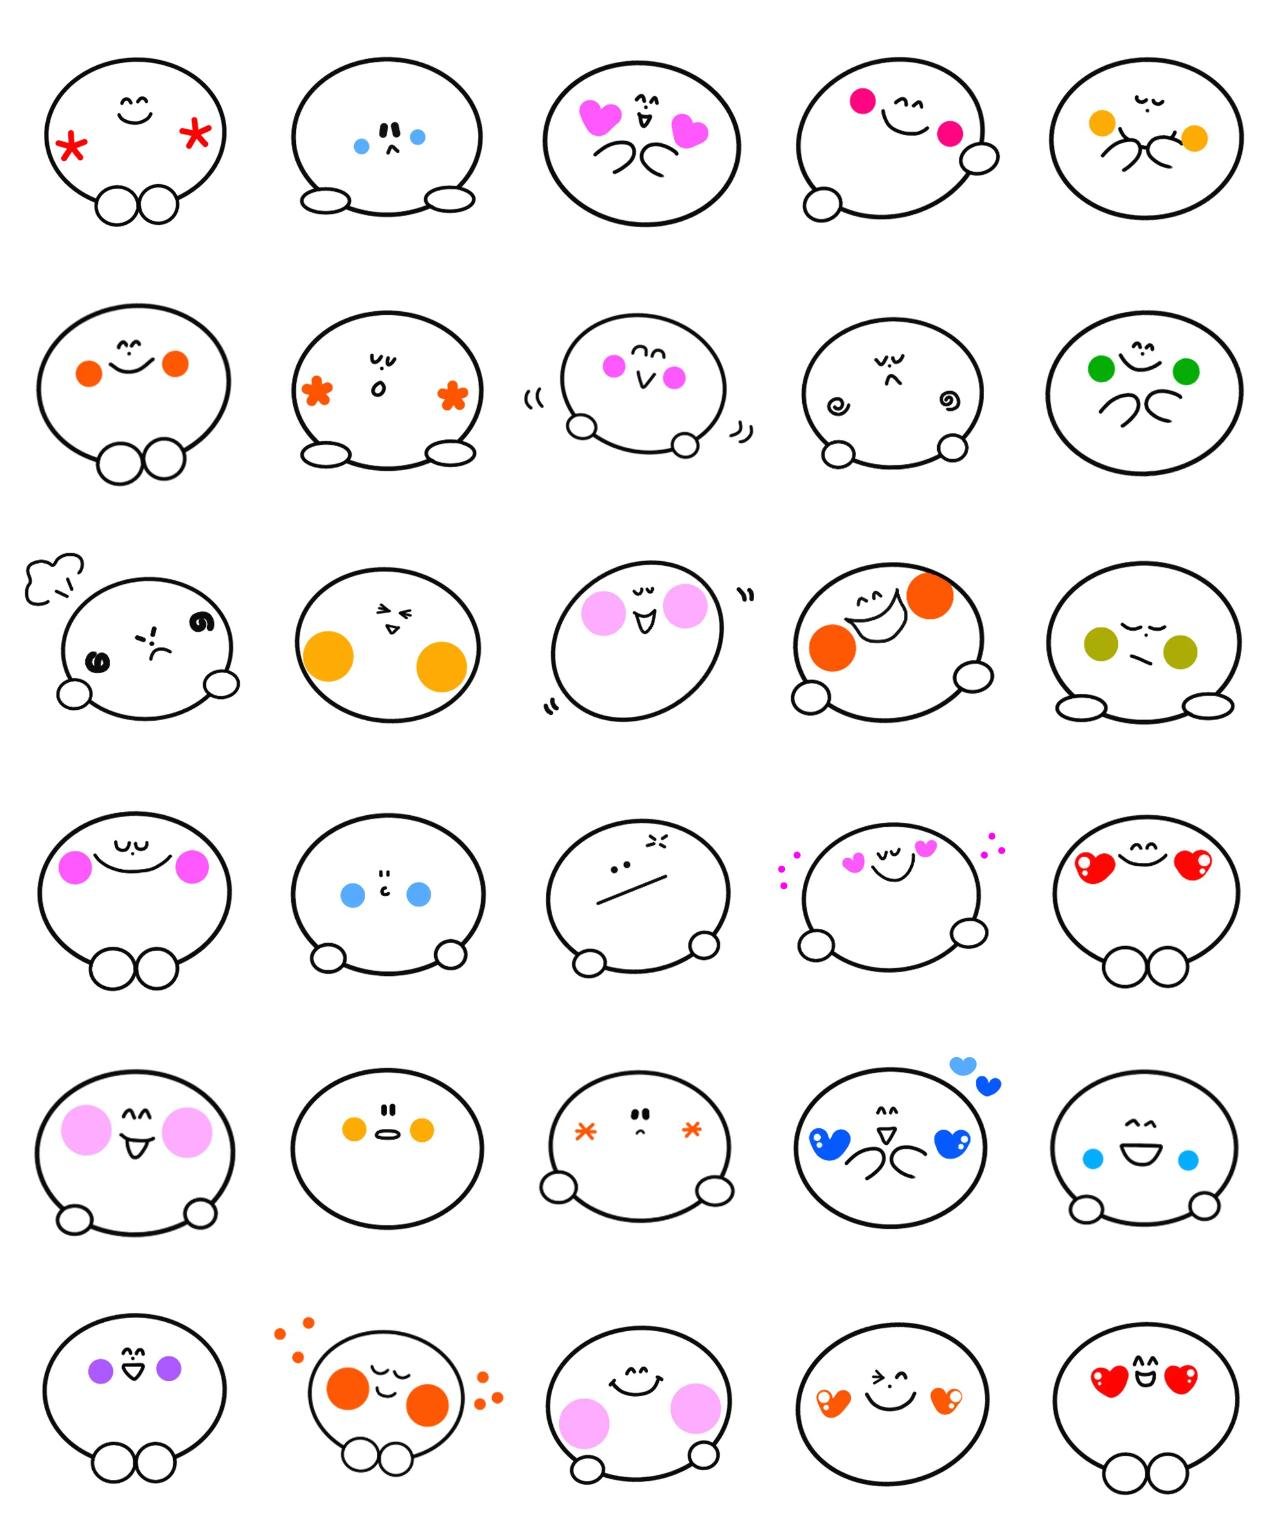 Nice Gag,Etc. sticker pack for Whatsapp, Telegram, Signal, and others chatting and message apps